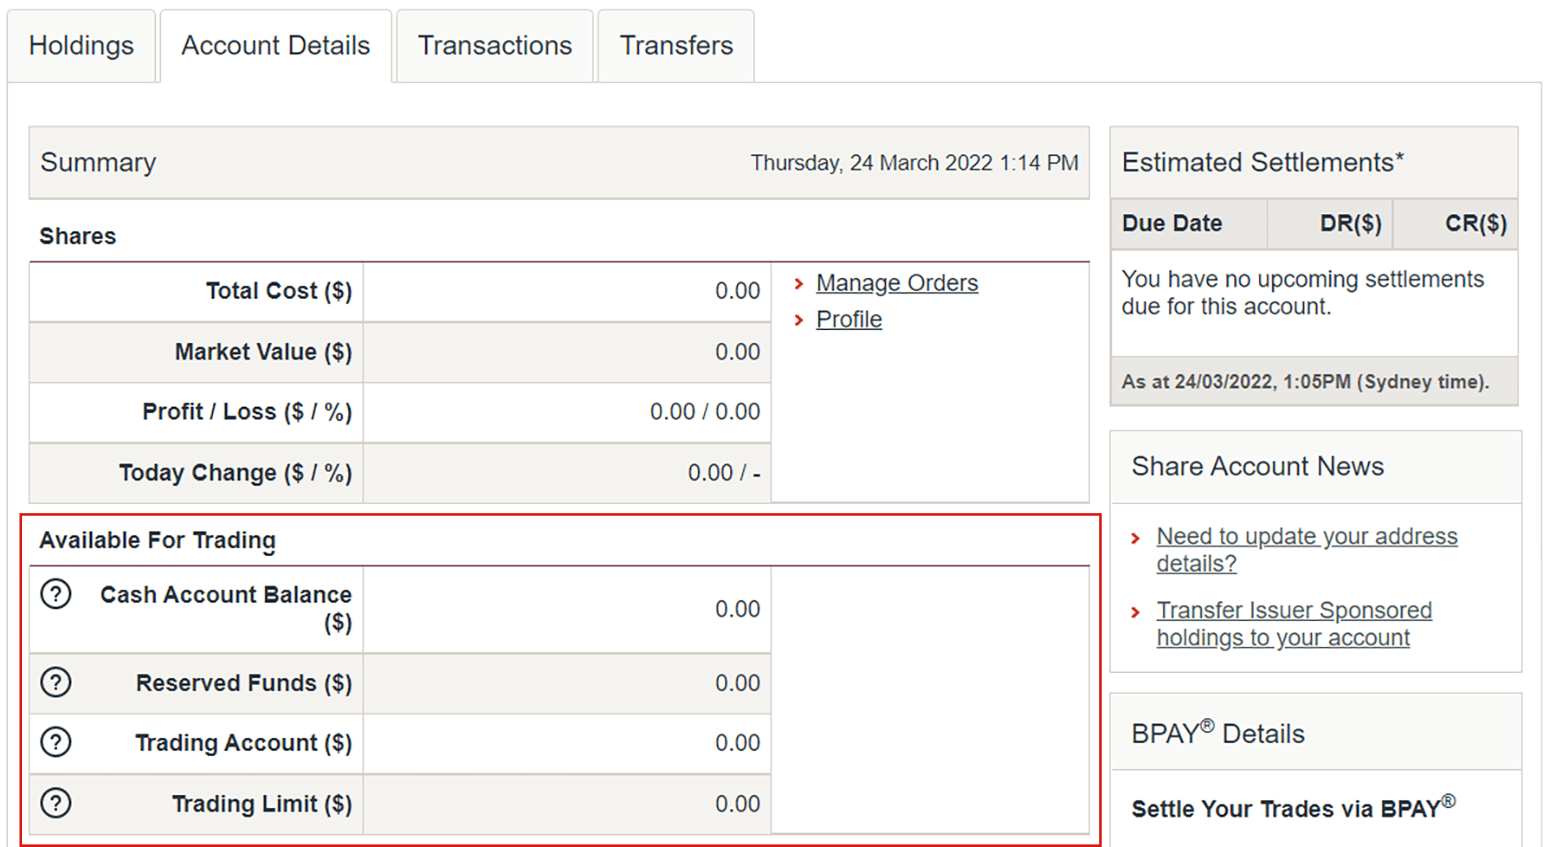 Trading Limit on the Account Details Page